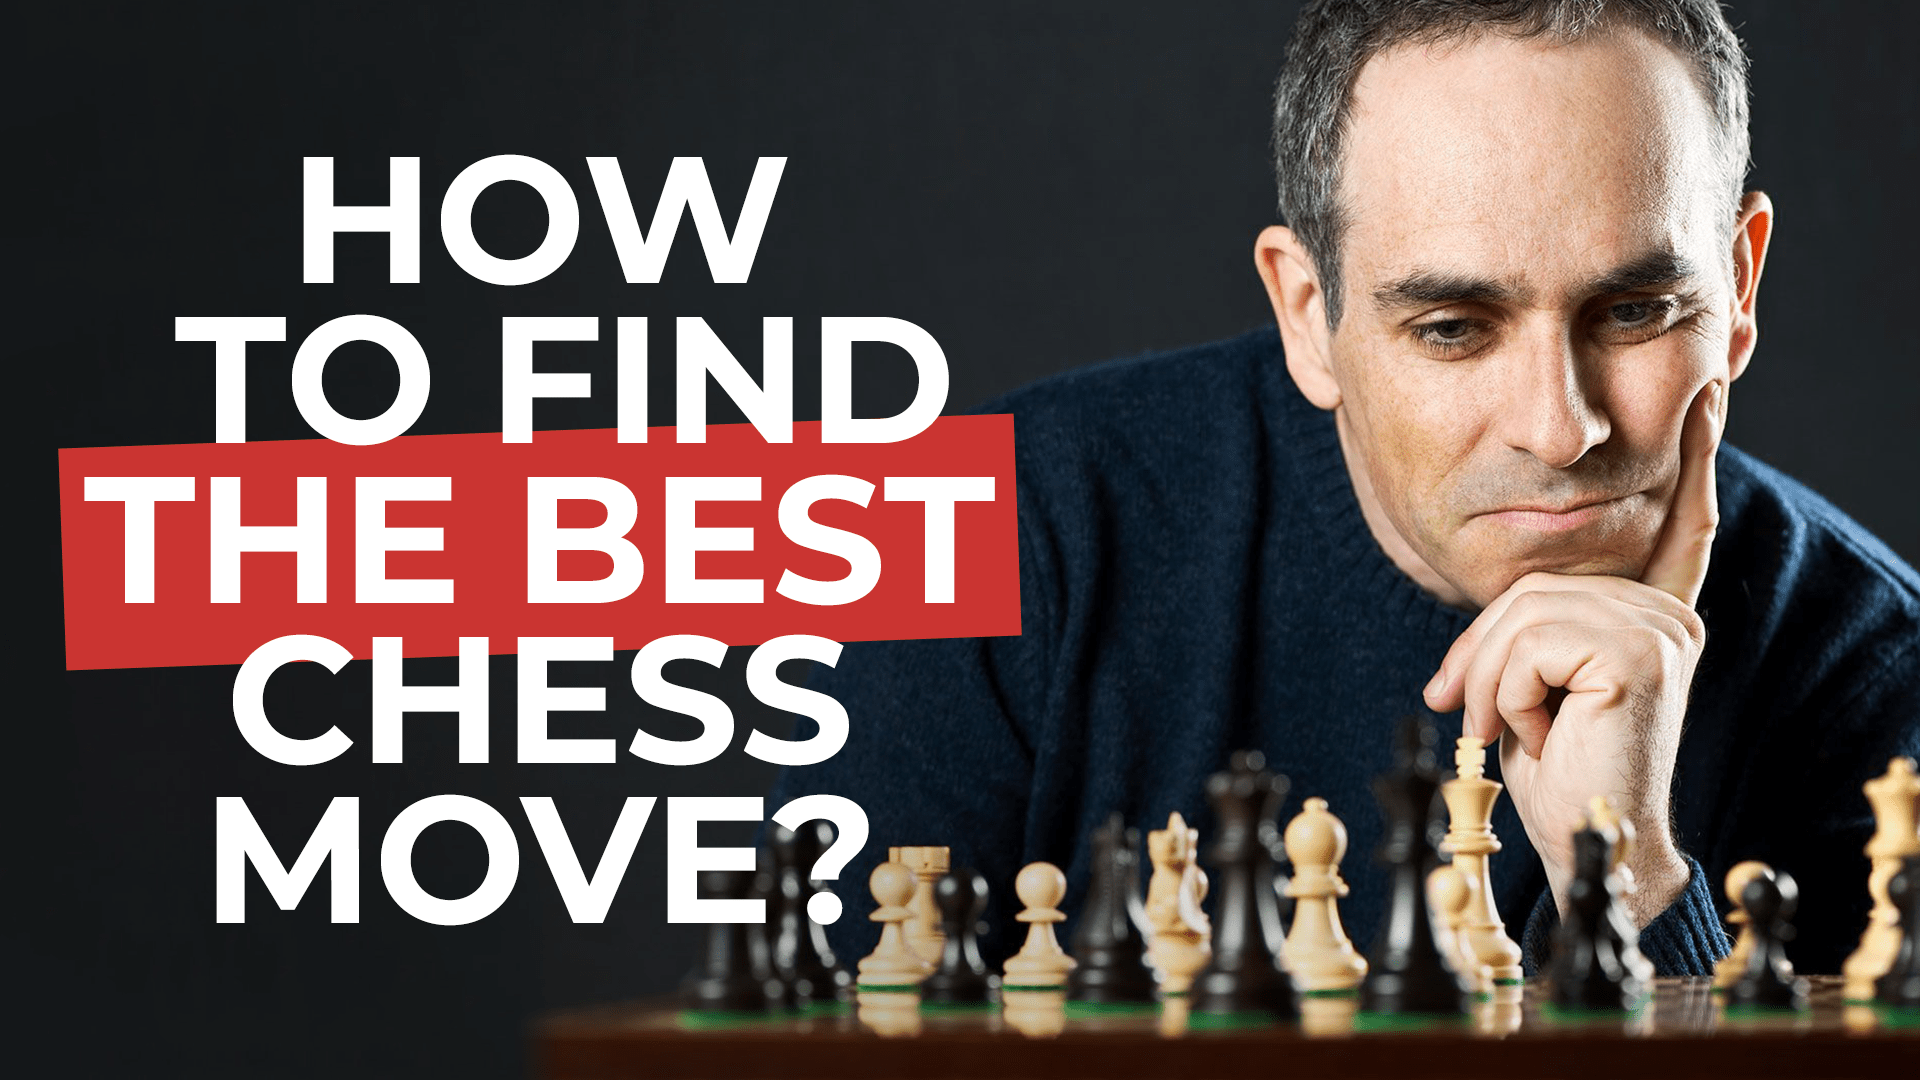 Chess - The Joy of Finding the Best Move in Your Life!